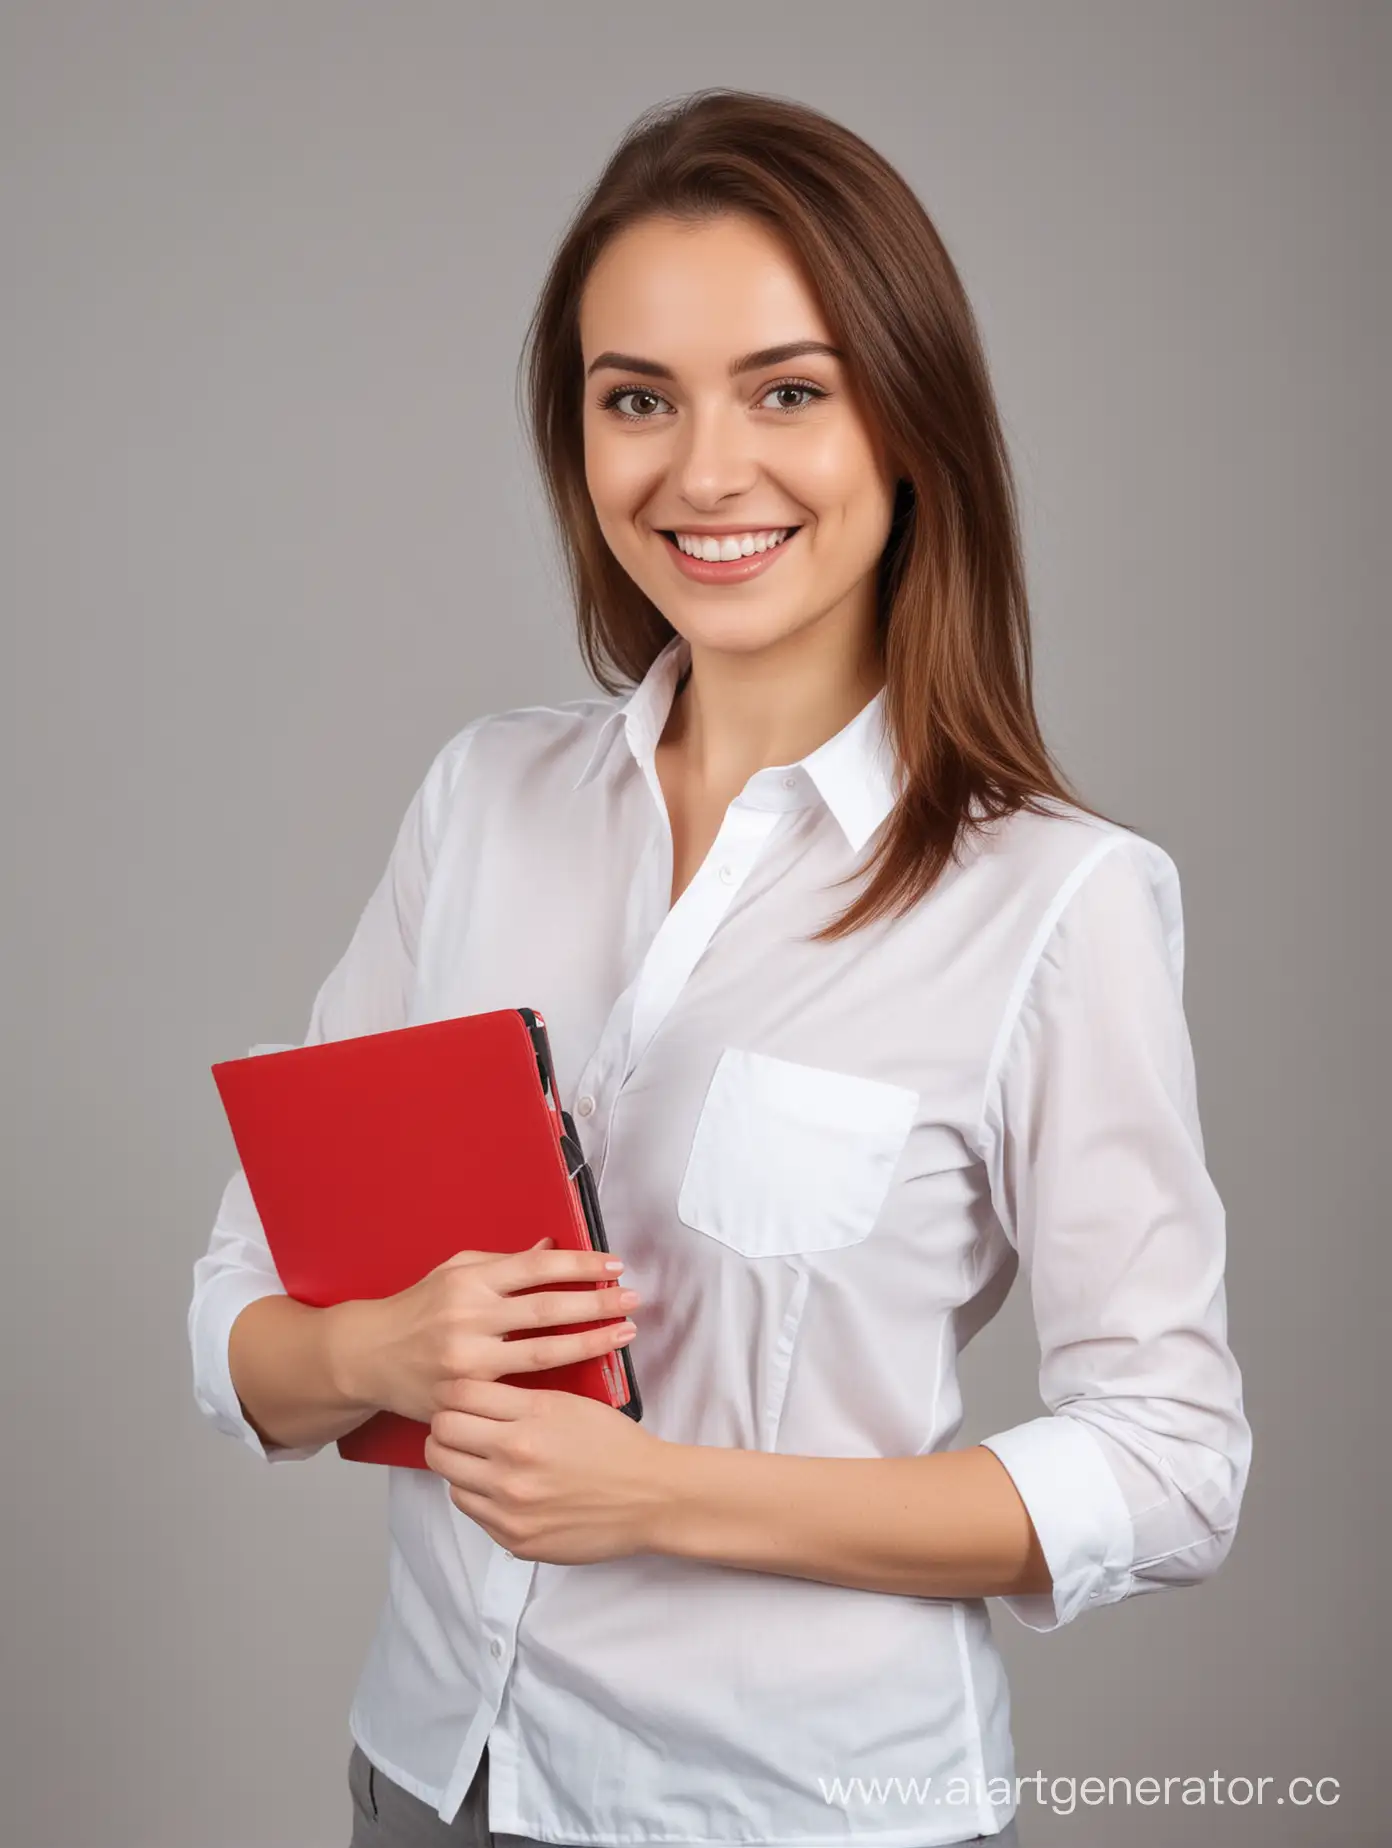 Smiling-Woman-with-Red-Folder-Making-Calculations